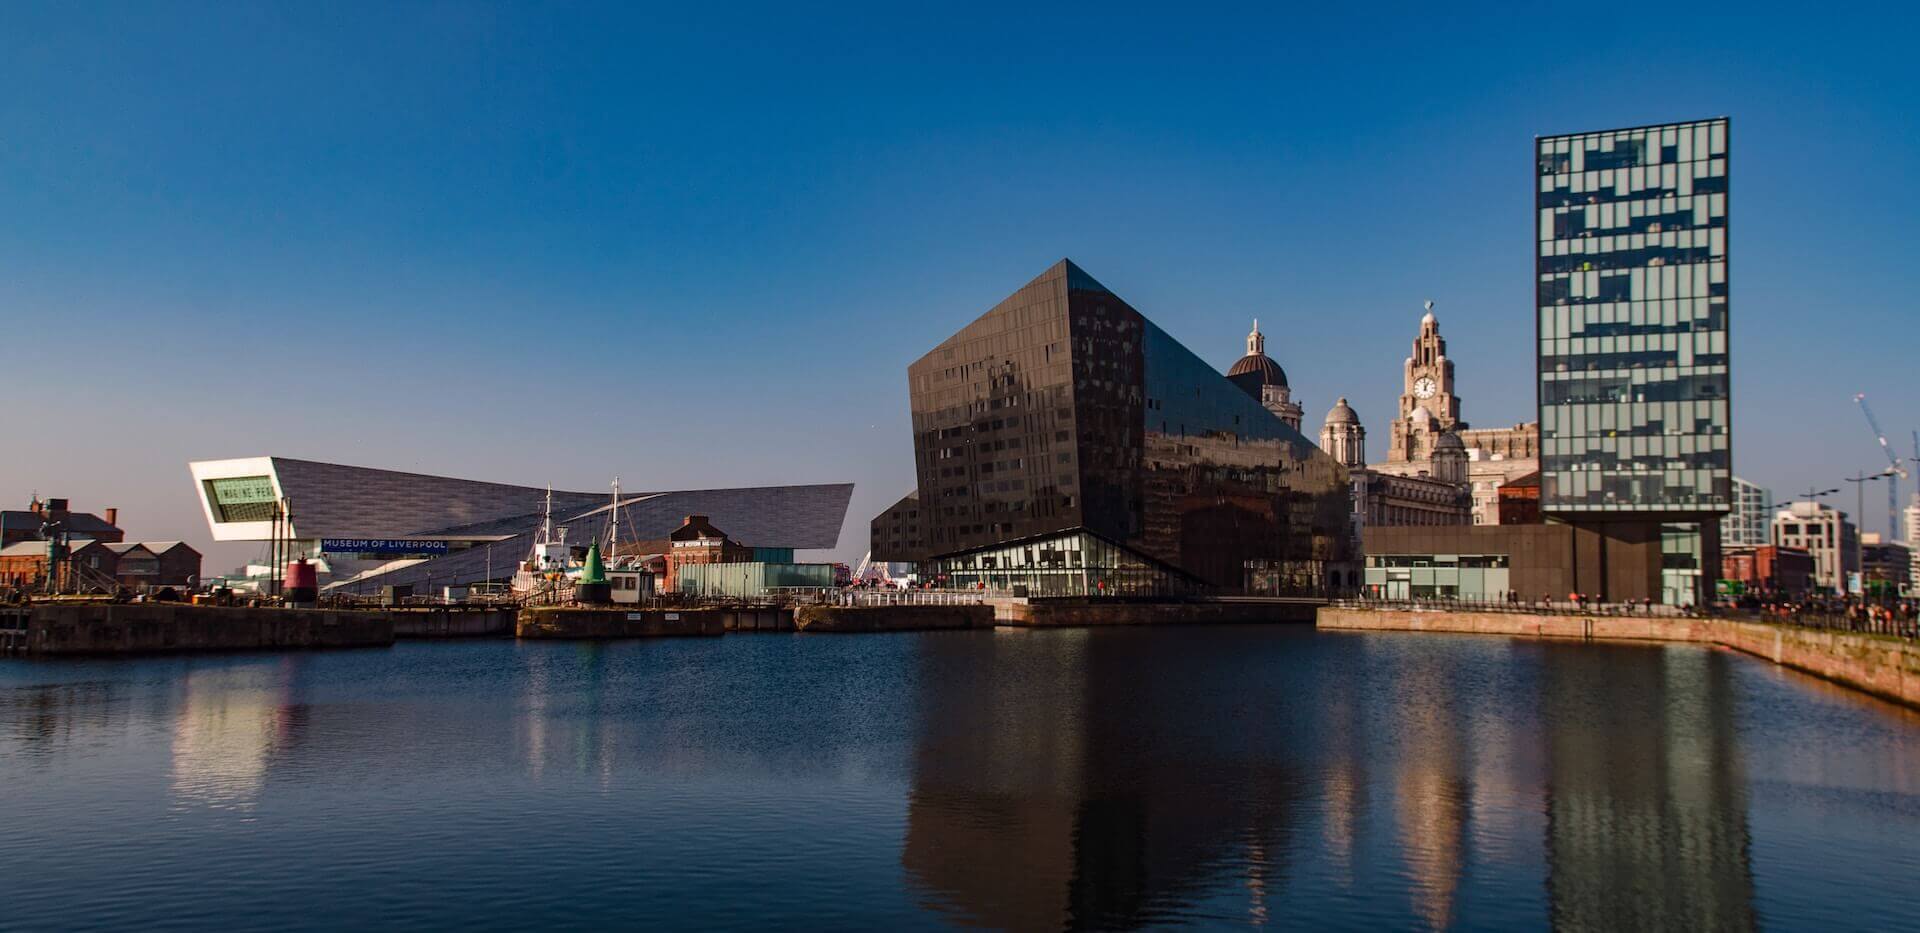 Architecture and Albert Dock in Liverpool, United Kingdom